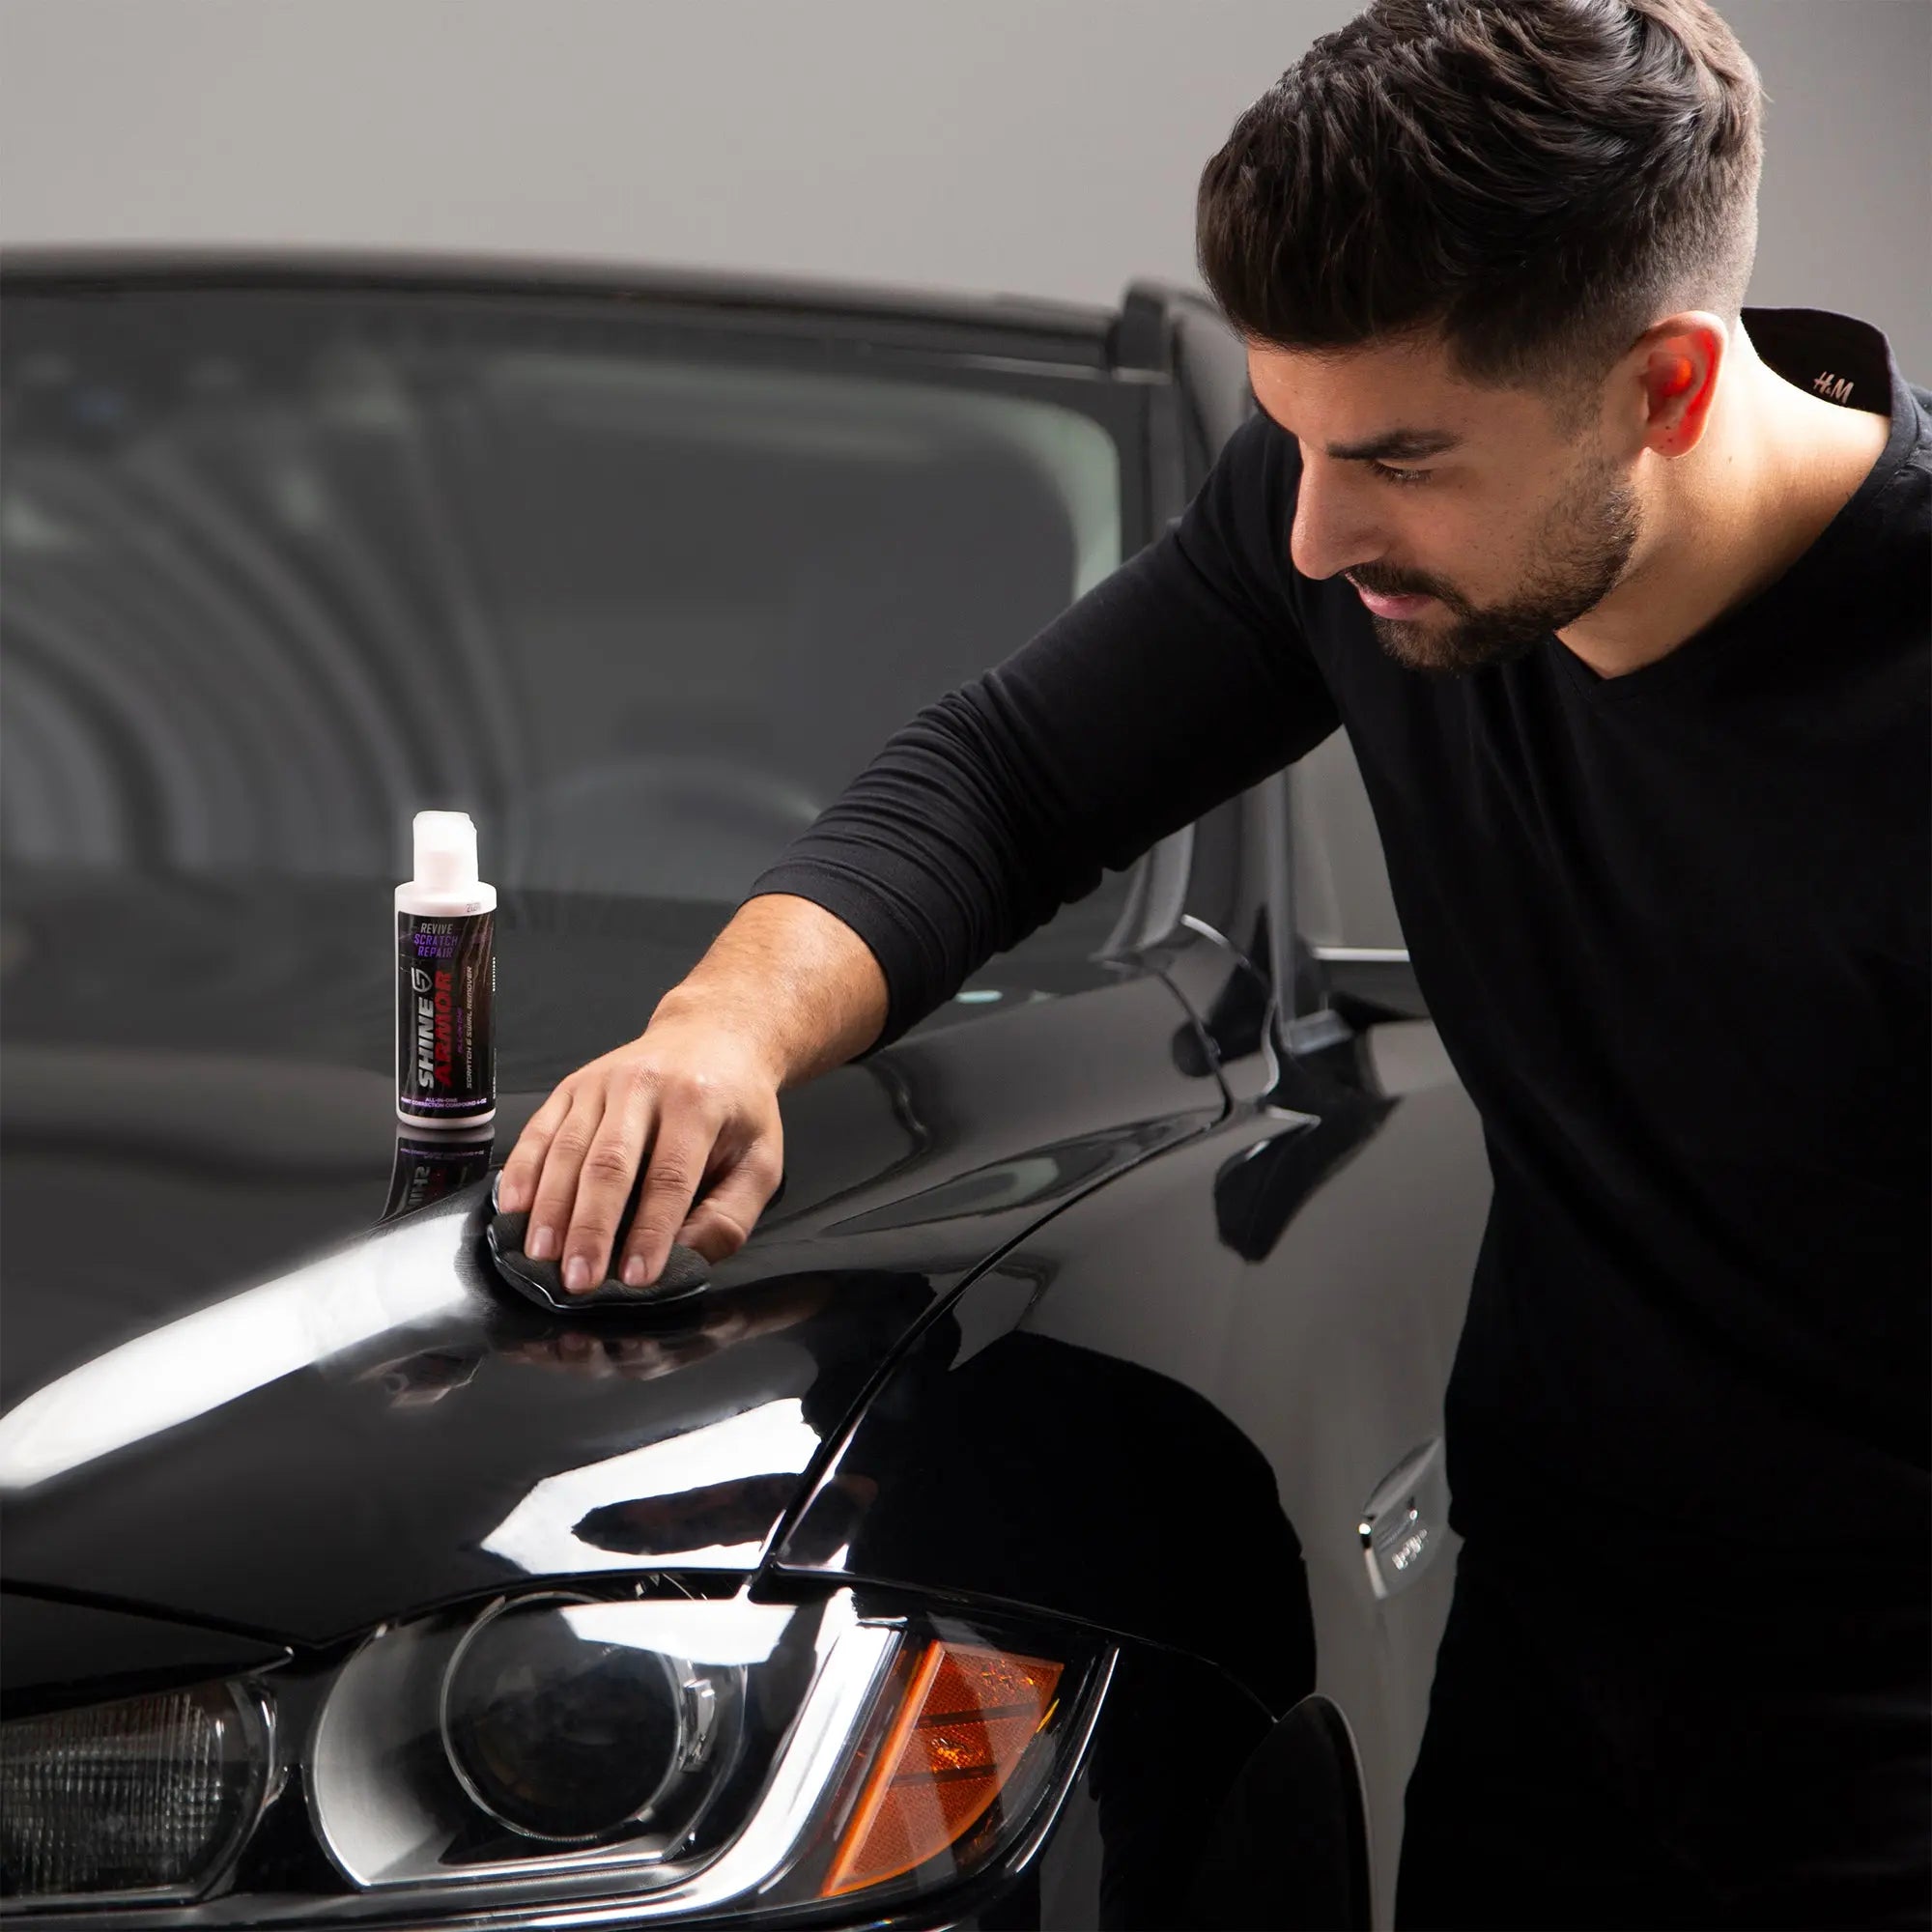 Car Scratch Removal Black for Deep Scratches Auto Lebanon